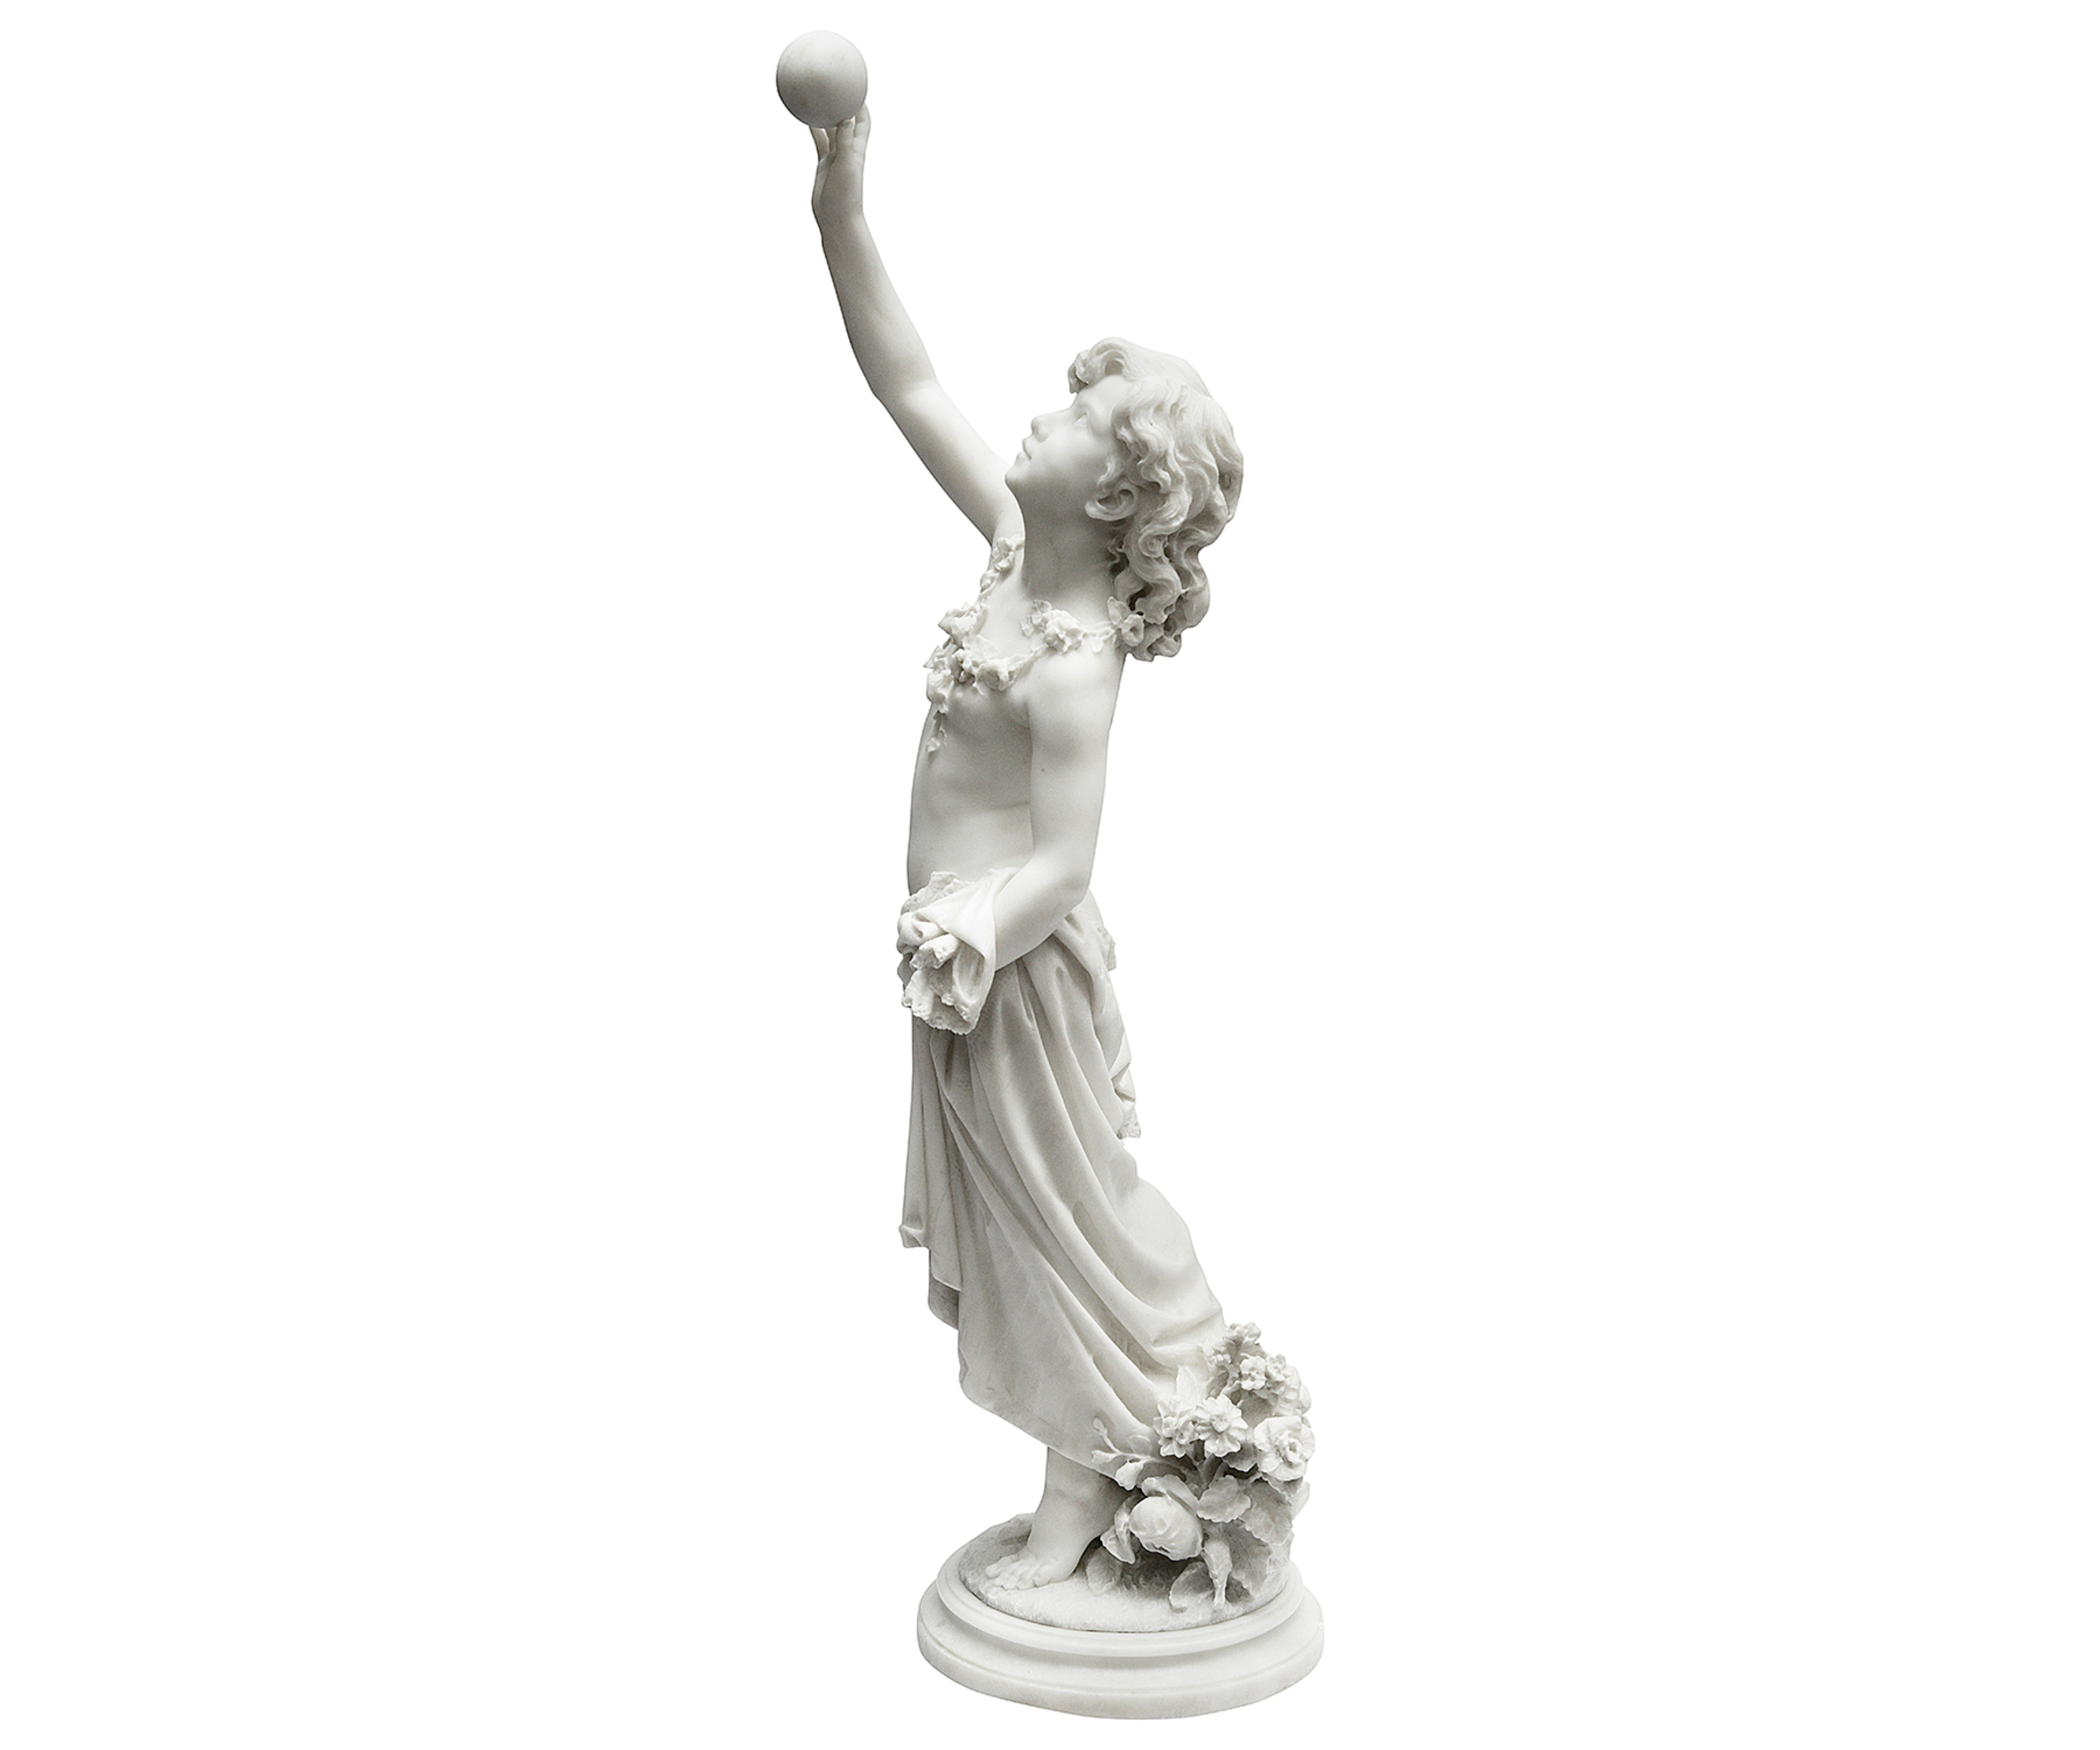 A fine quality 19th Century Italian Carrera marble statue of a semi nude young girl playing ball. Having garlands of flowers around her neck and looking skyward.

Signed; Donato Baraglia.
Italian
1849 - 1930
A native of Pavia, Donato Barcaglia